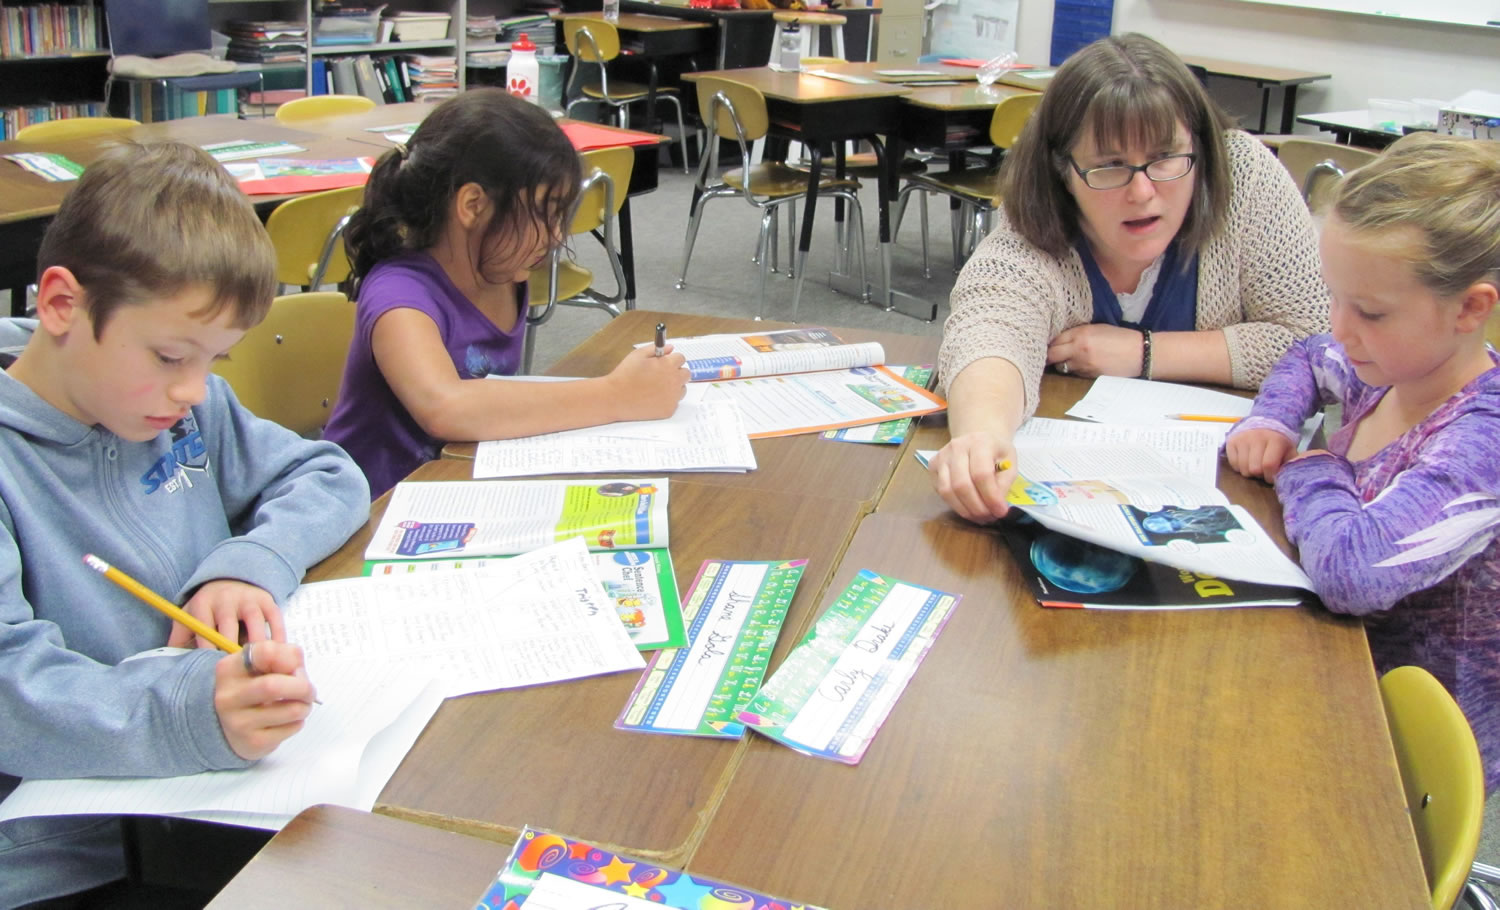 Cape Horn-Skye Elementary has been named a Washington State School of Distinction for its performance on state tests. Principal Mary Lou Woody credits the teachers and strong parent community for the school's success.